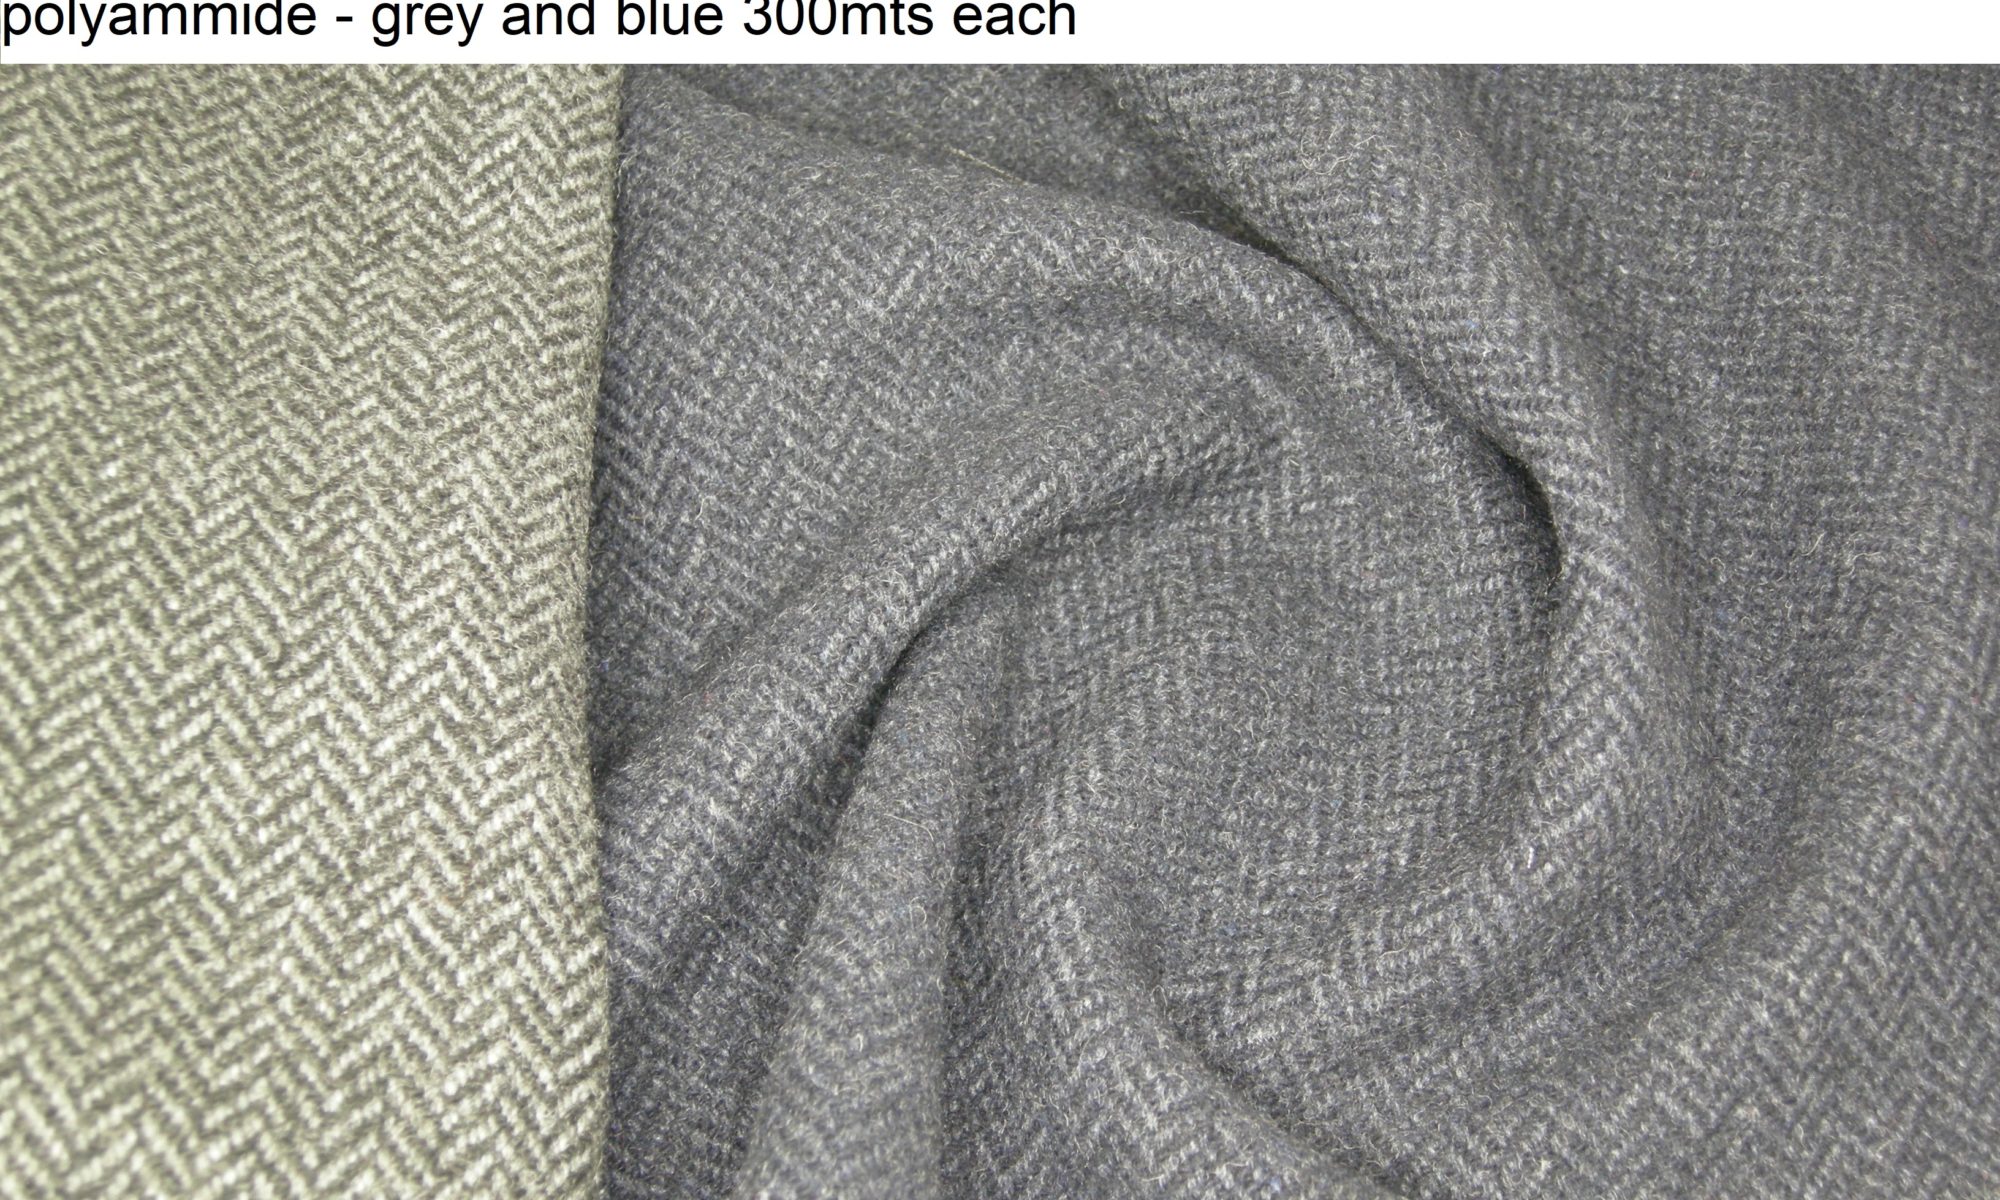 7742 herringbone wool blend coat fabric WIDTH cm155 WEIGHT gr510 - gr329 square meter - COMPOSITION 30 wool 30 acrylic 30 polyester 10 polyammide - grey and blue 300mts each